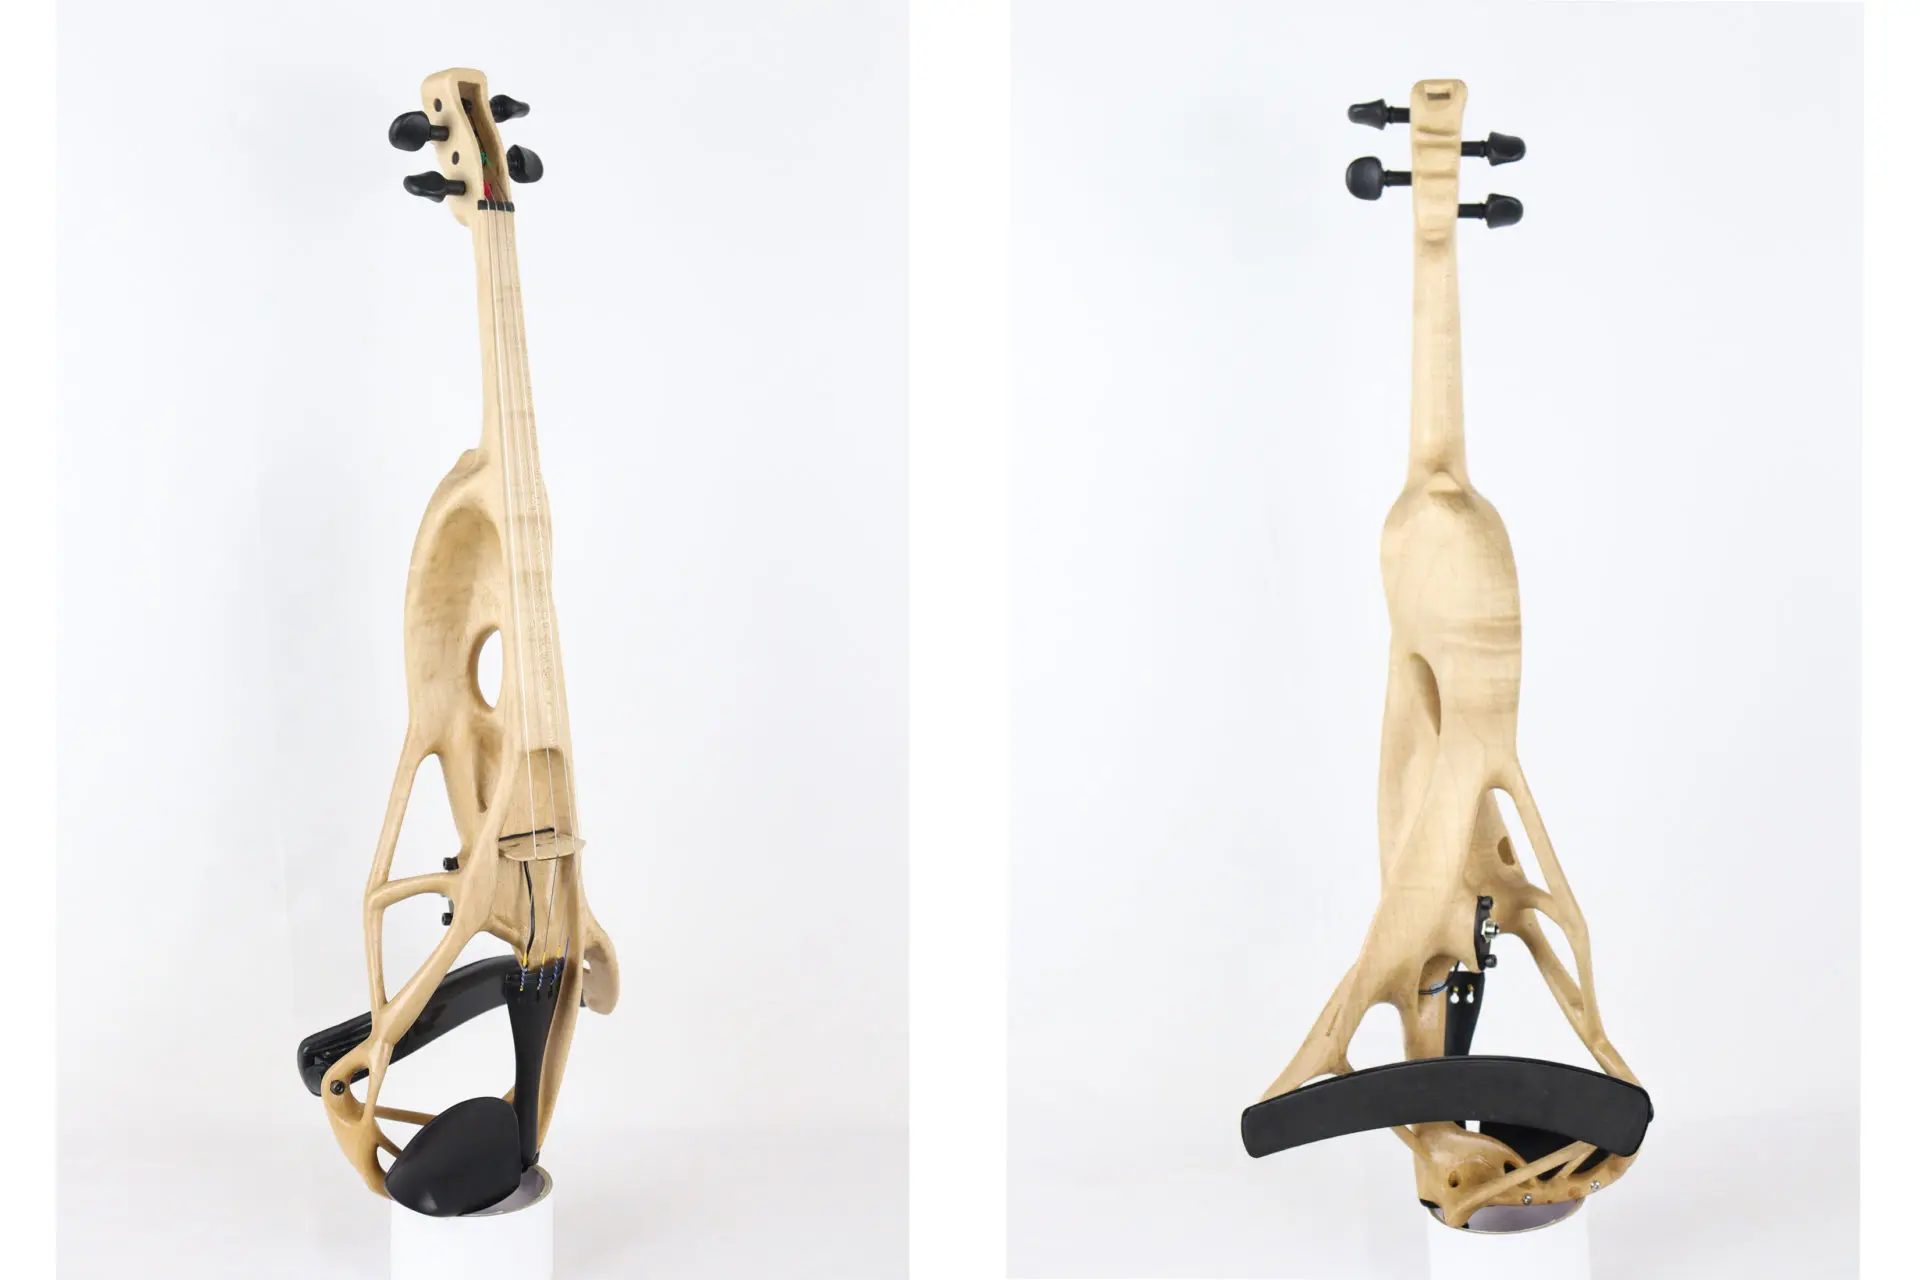 electric violin design - Do electric violins need different bows